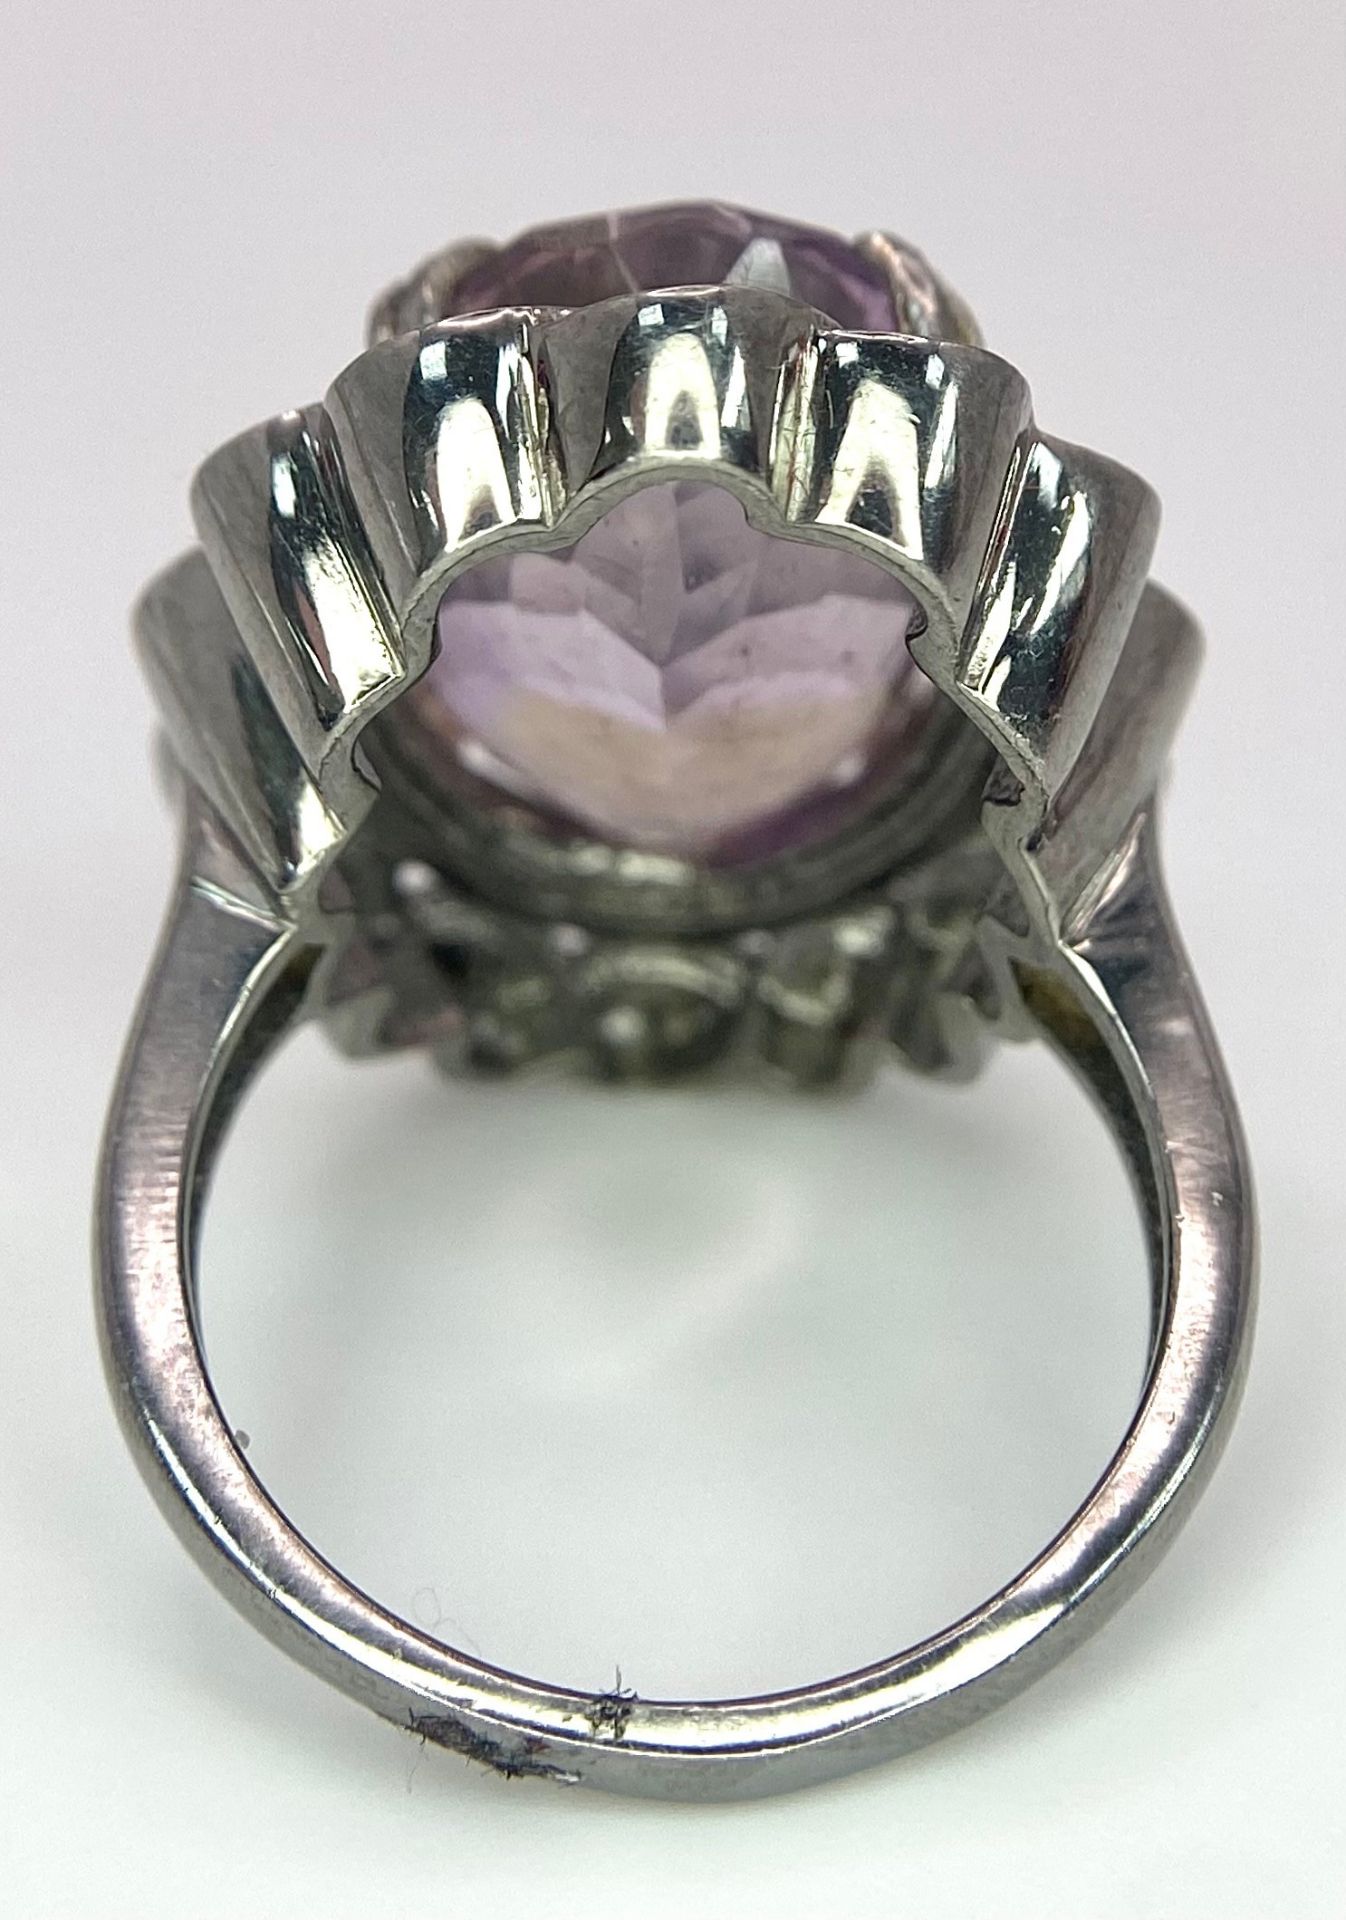 An 11.65ct Amethyst Ring with 0.25ctw of Diamond Accents. Set in 925 Silver. Size N. 9.4g total - Image 3 of 6